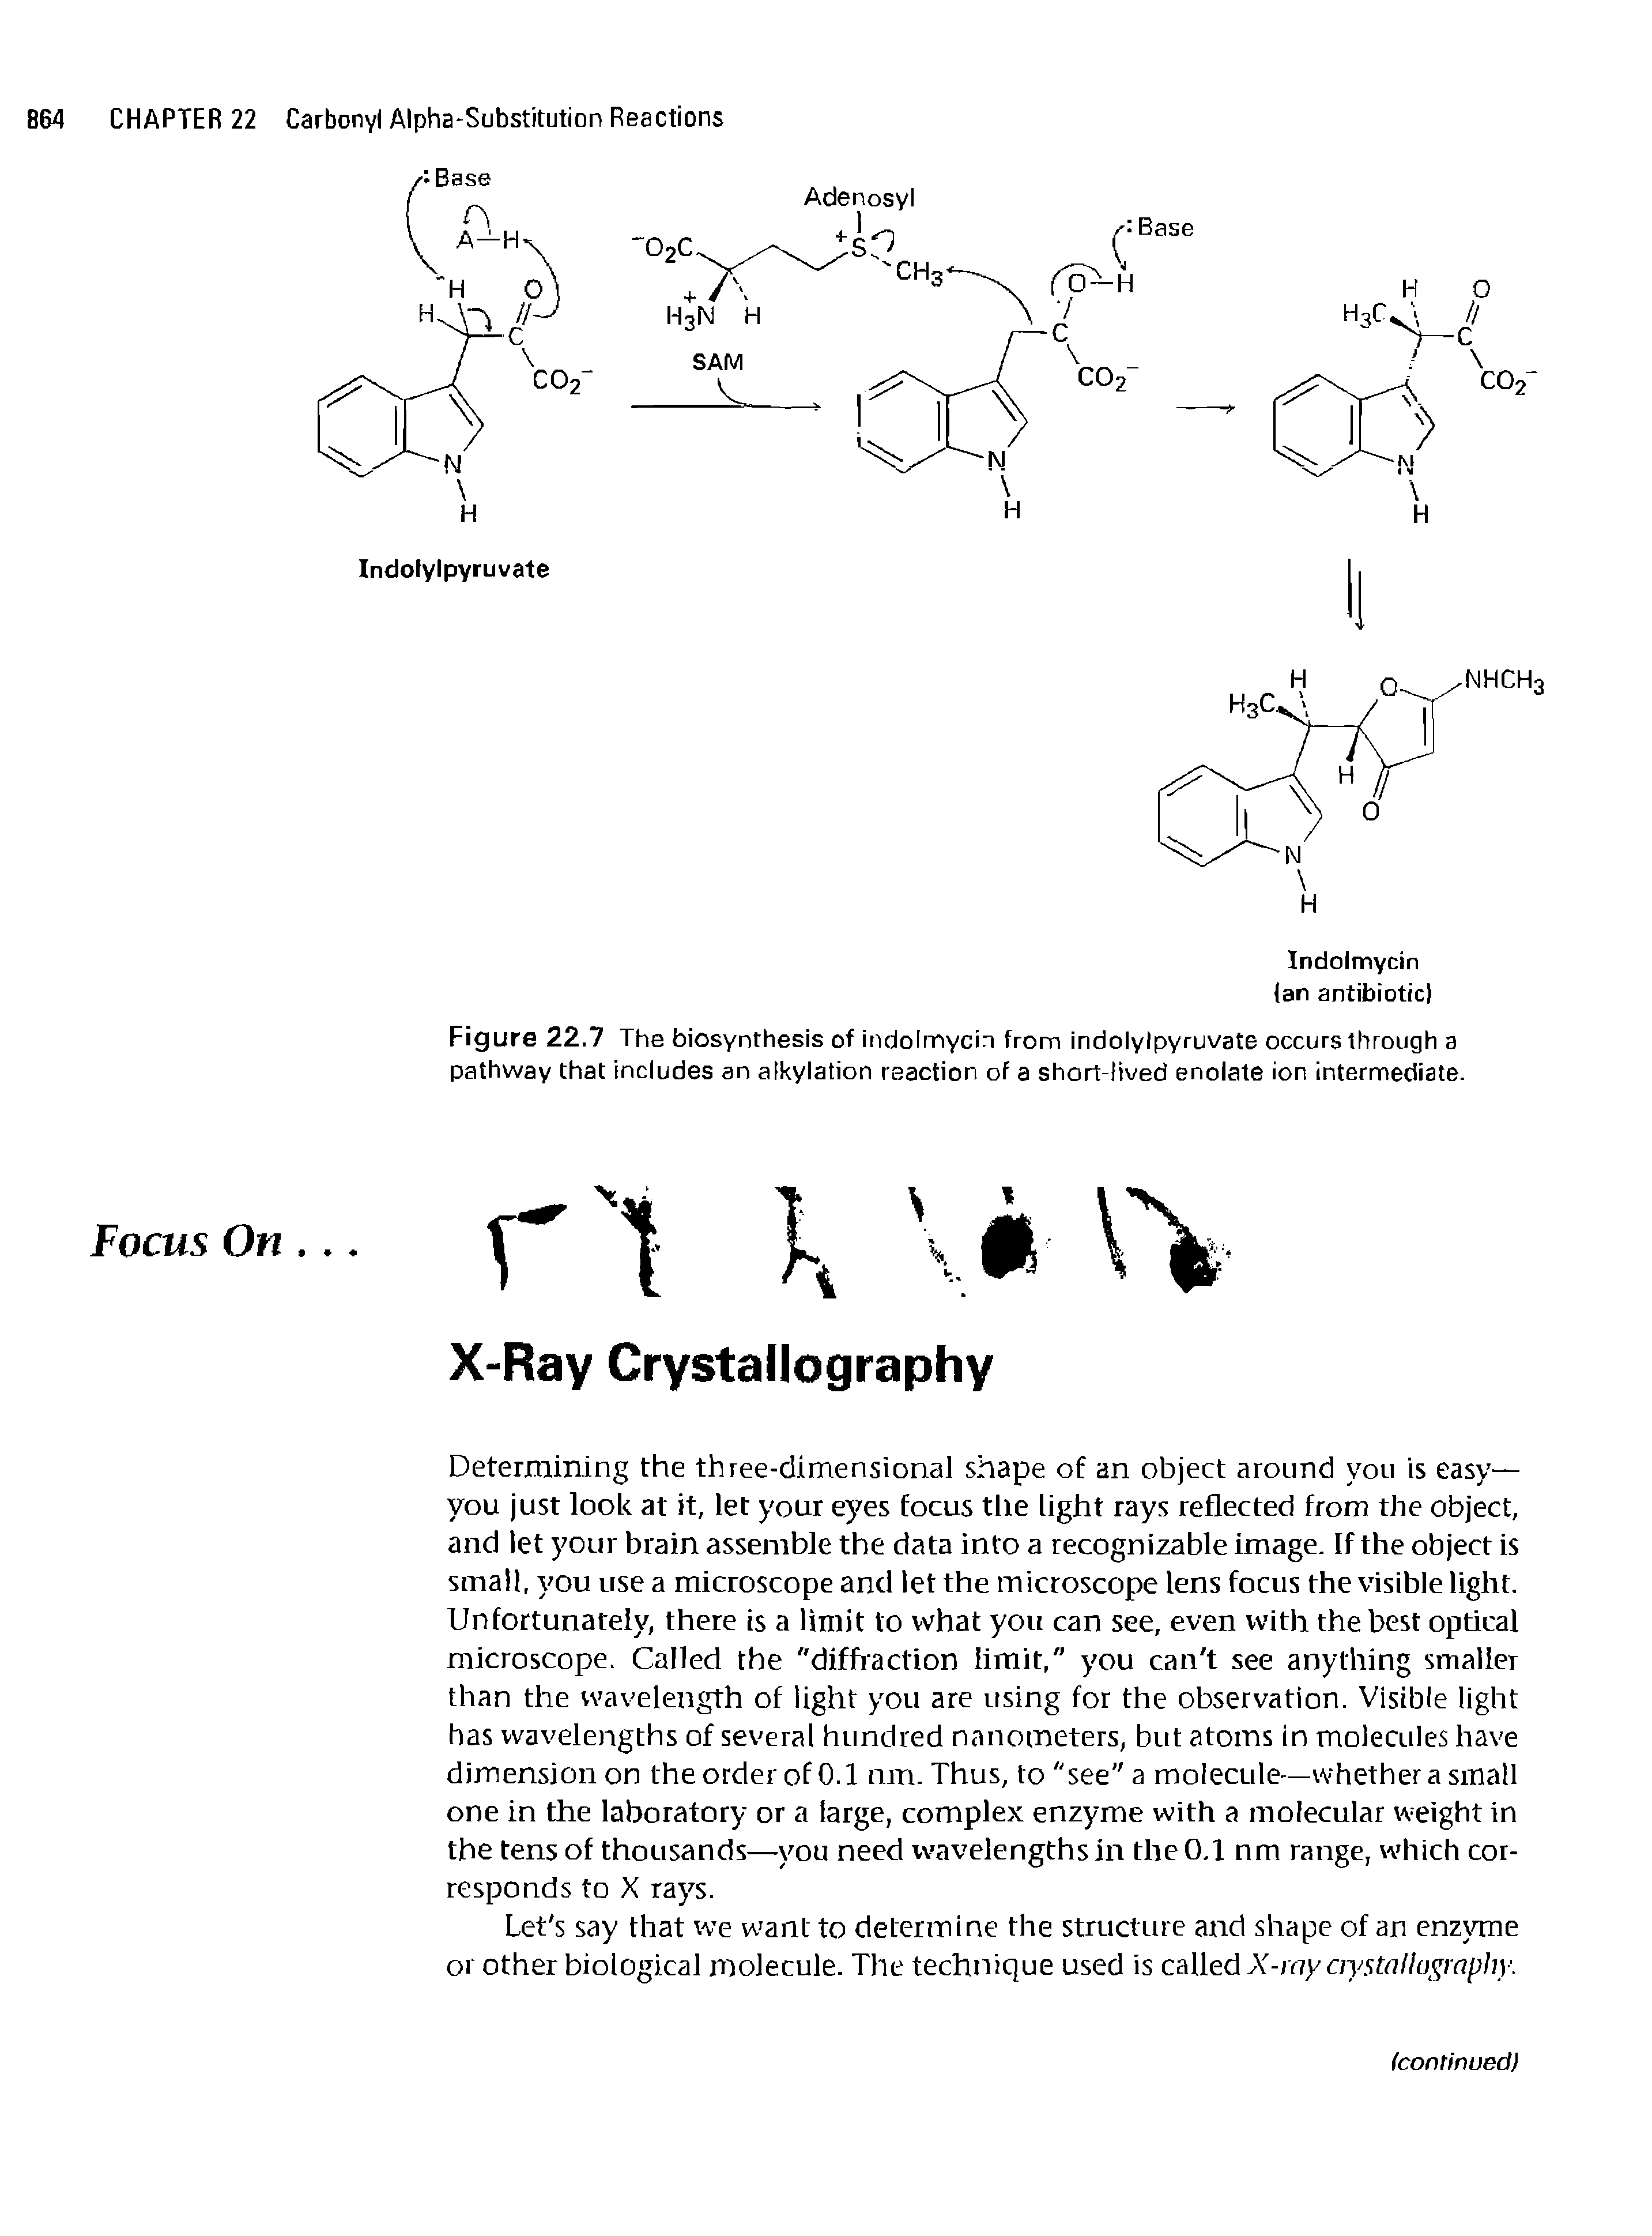 Figure 22.7 The biosynthesis of indolmycin from indolylpyruvate occurs through a pathway that includes an alkylation reaction of a short-lived enolate ion intermediate.